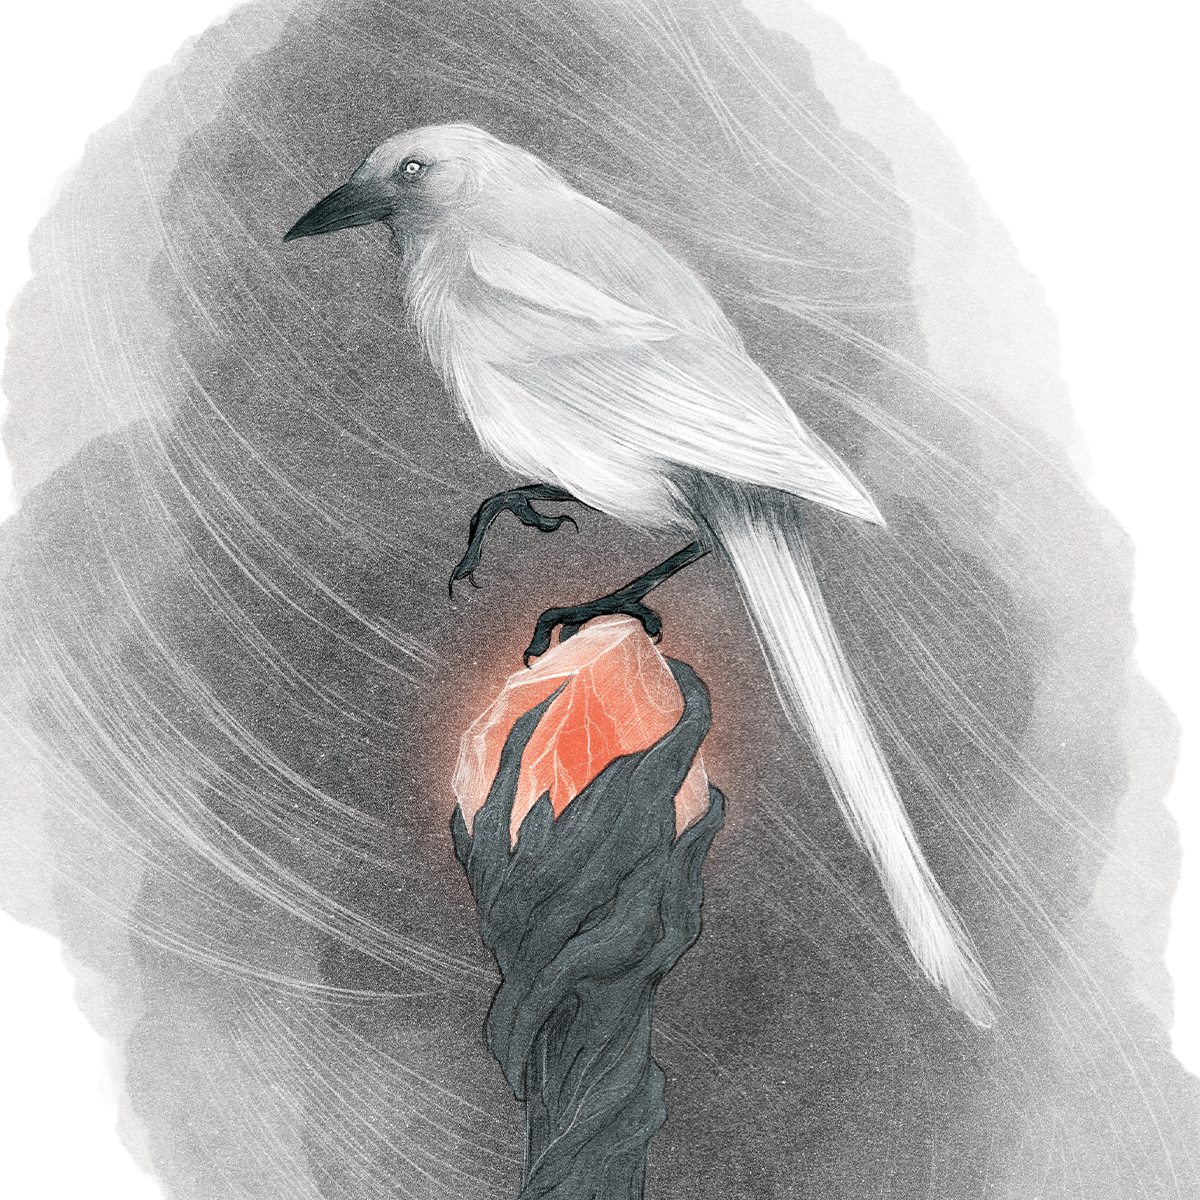 Image shows a white magpie sitting on top of the glowing ruby of a wizard's staff. Mist curls mysteriously around it.